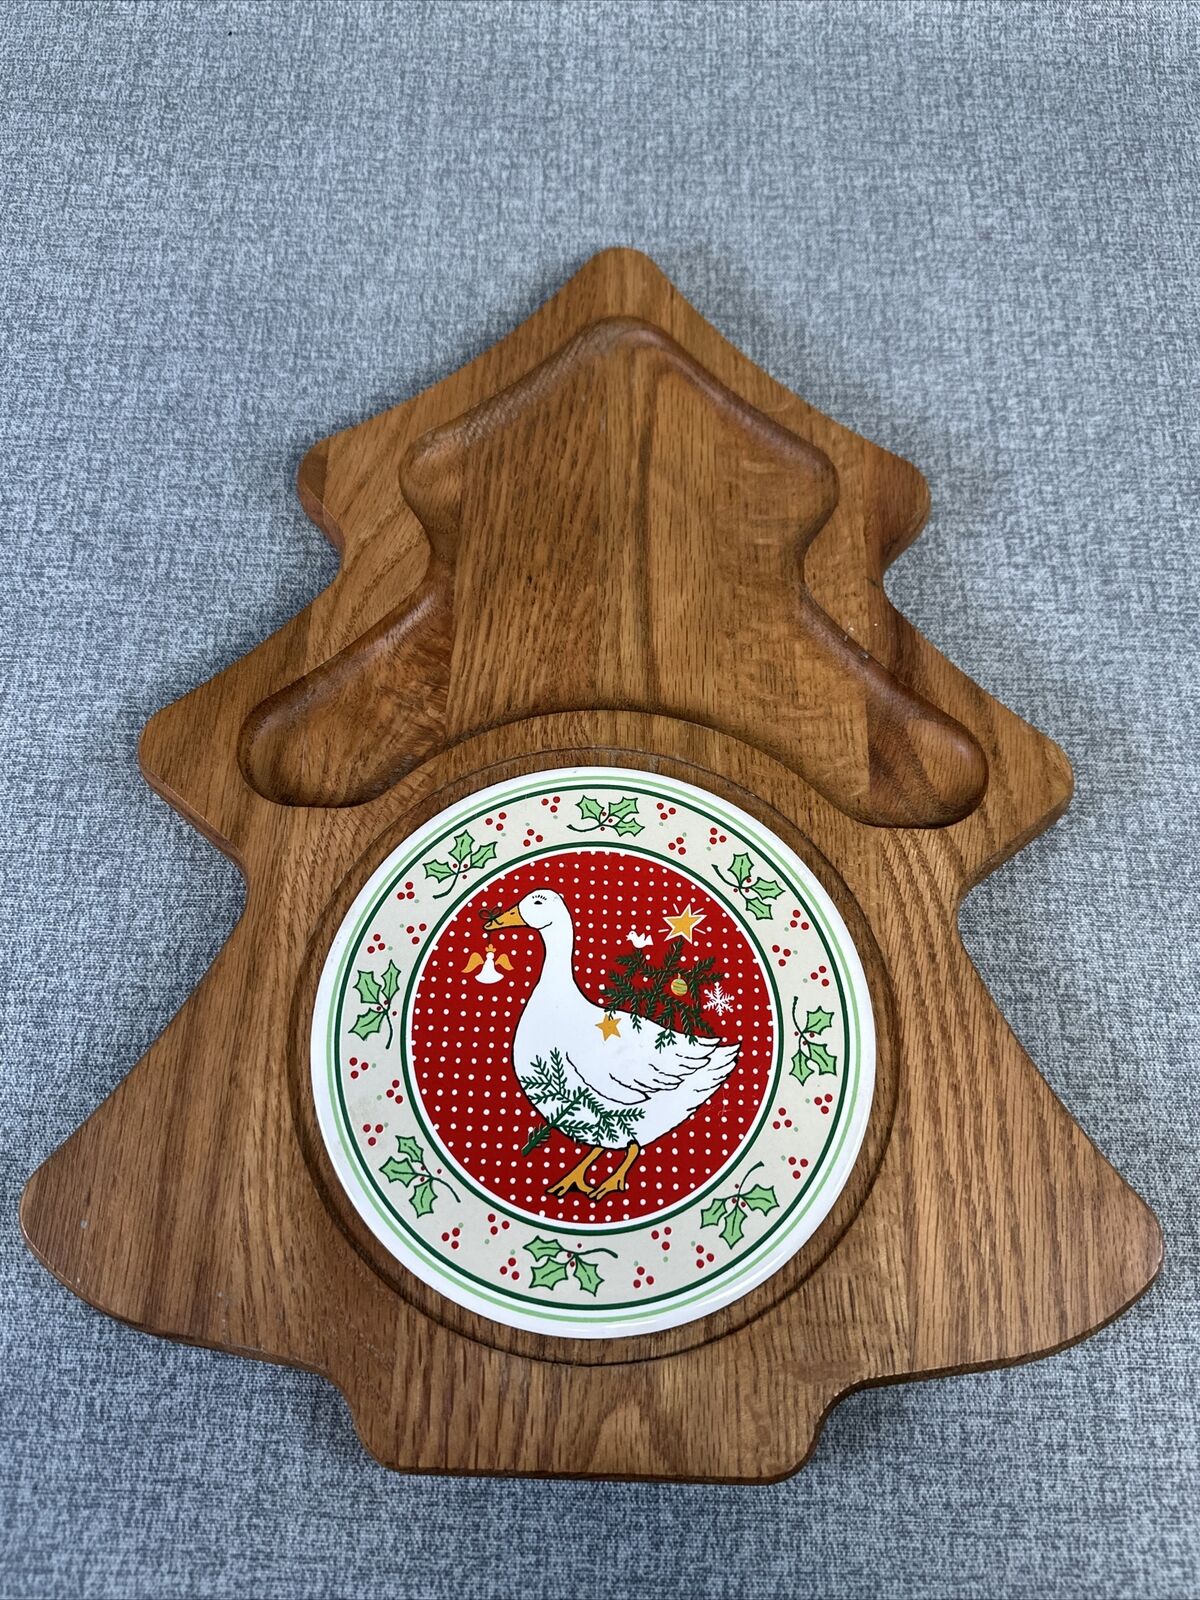 Vintage Vermillion Wood Christmas Tree Shaped Goose Party Tray USA Made AWESOME